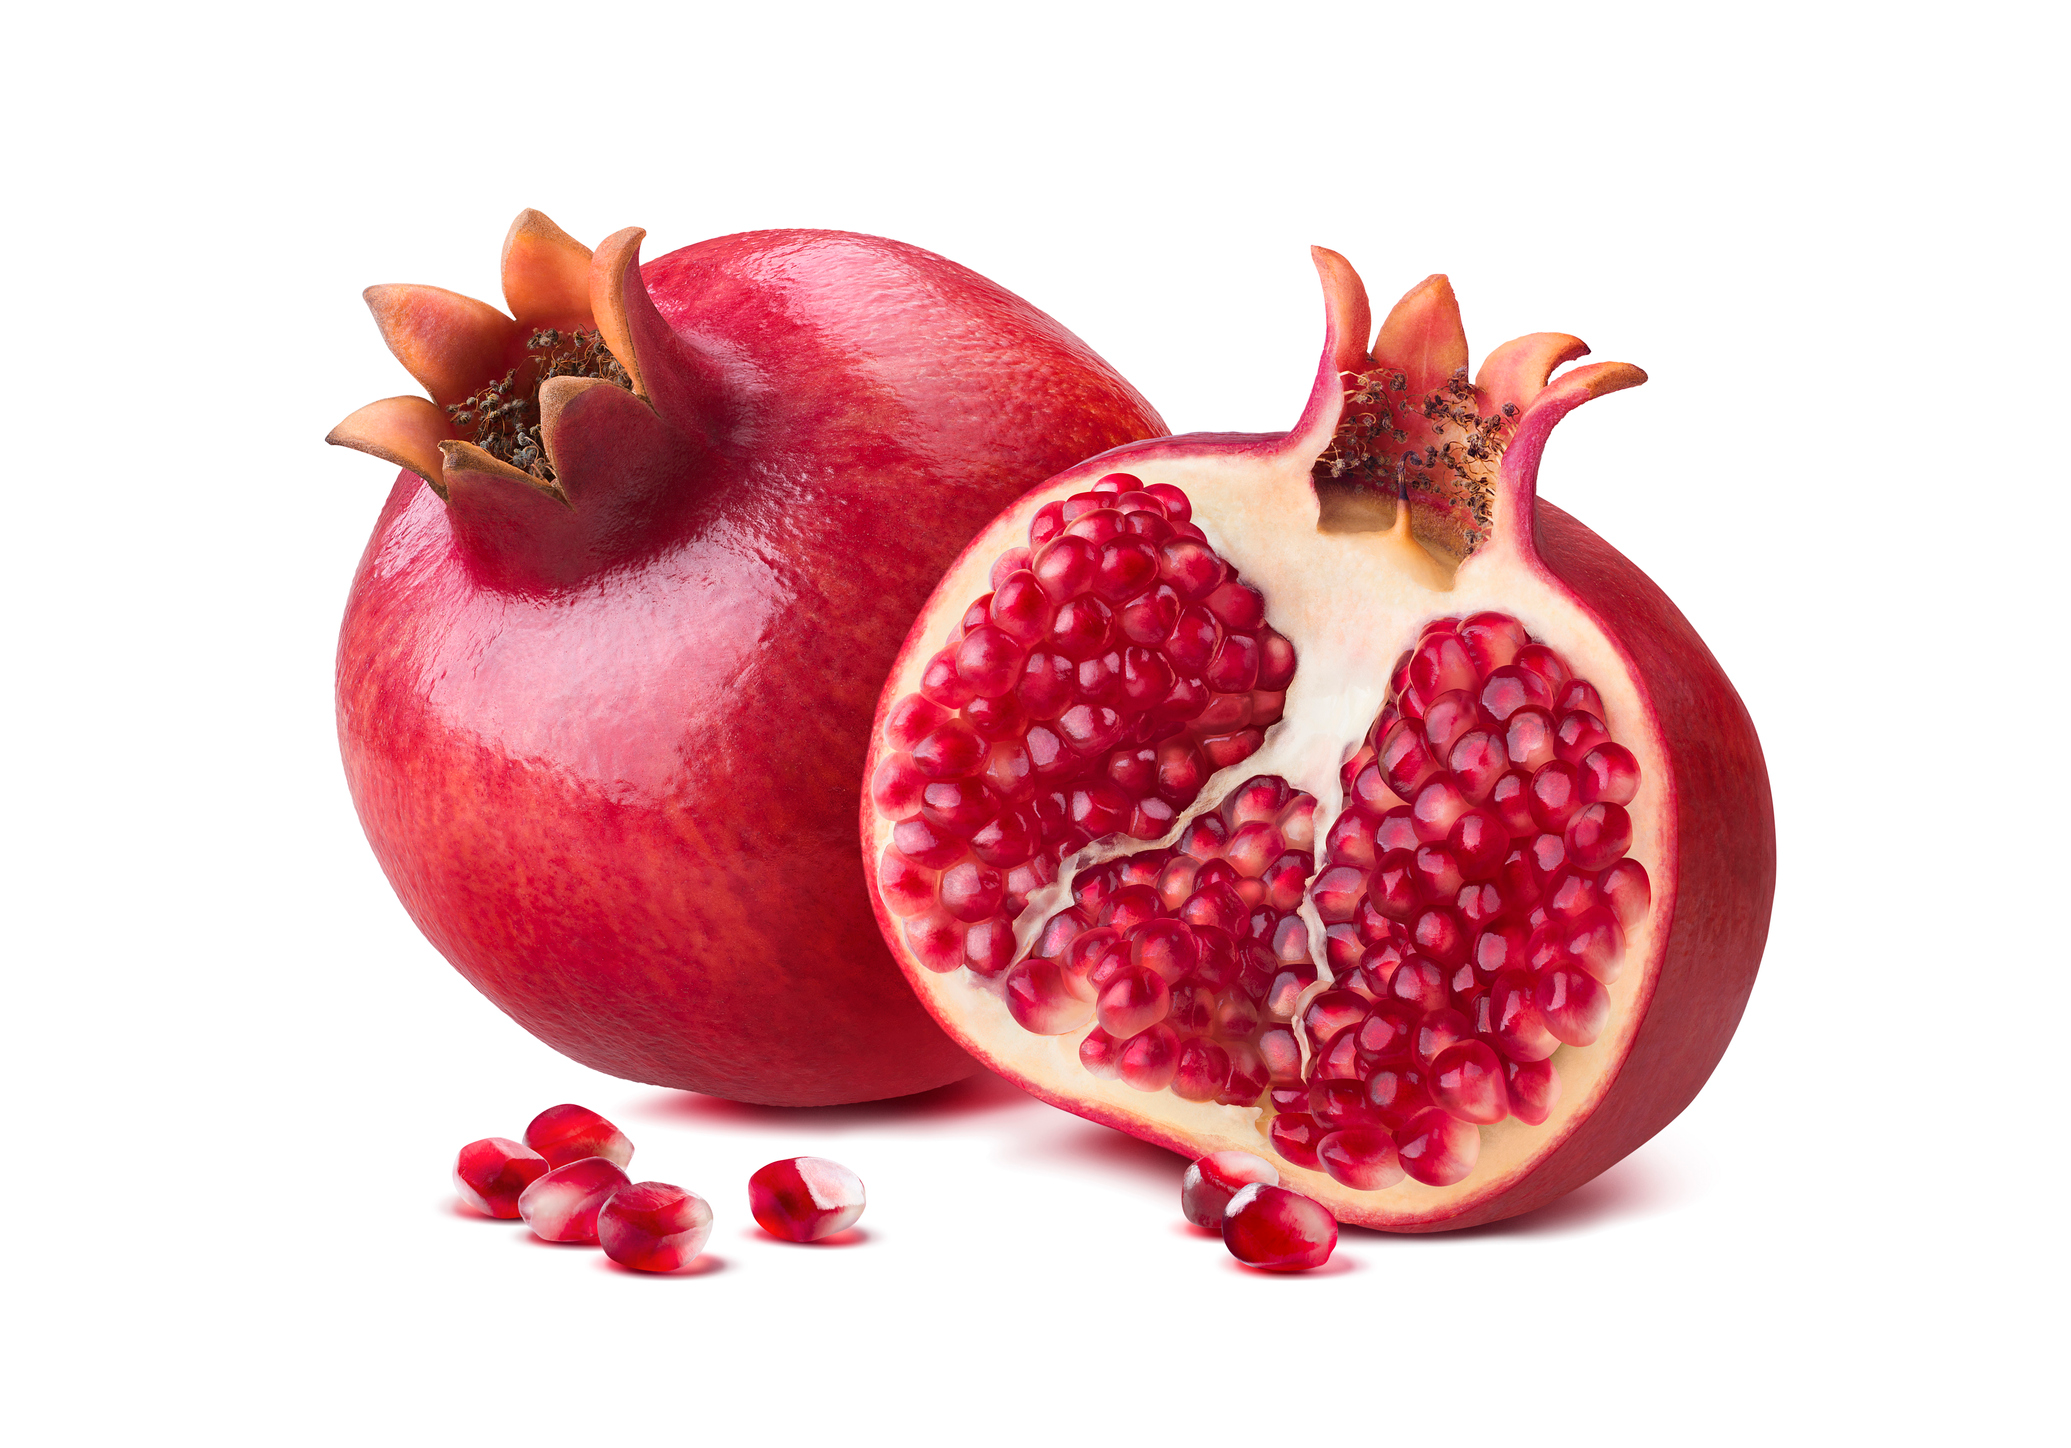 An image of pomegranate fruit.